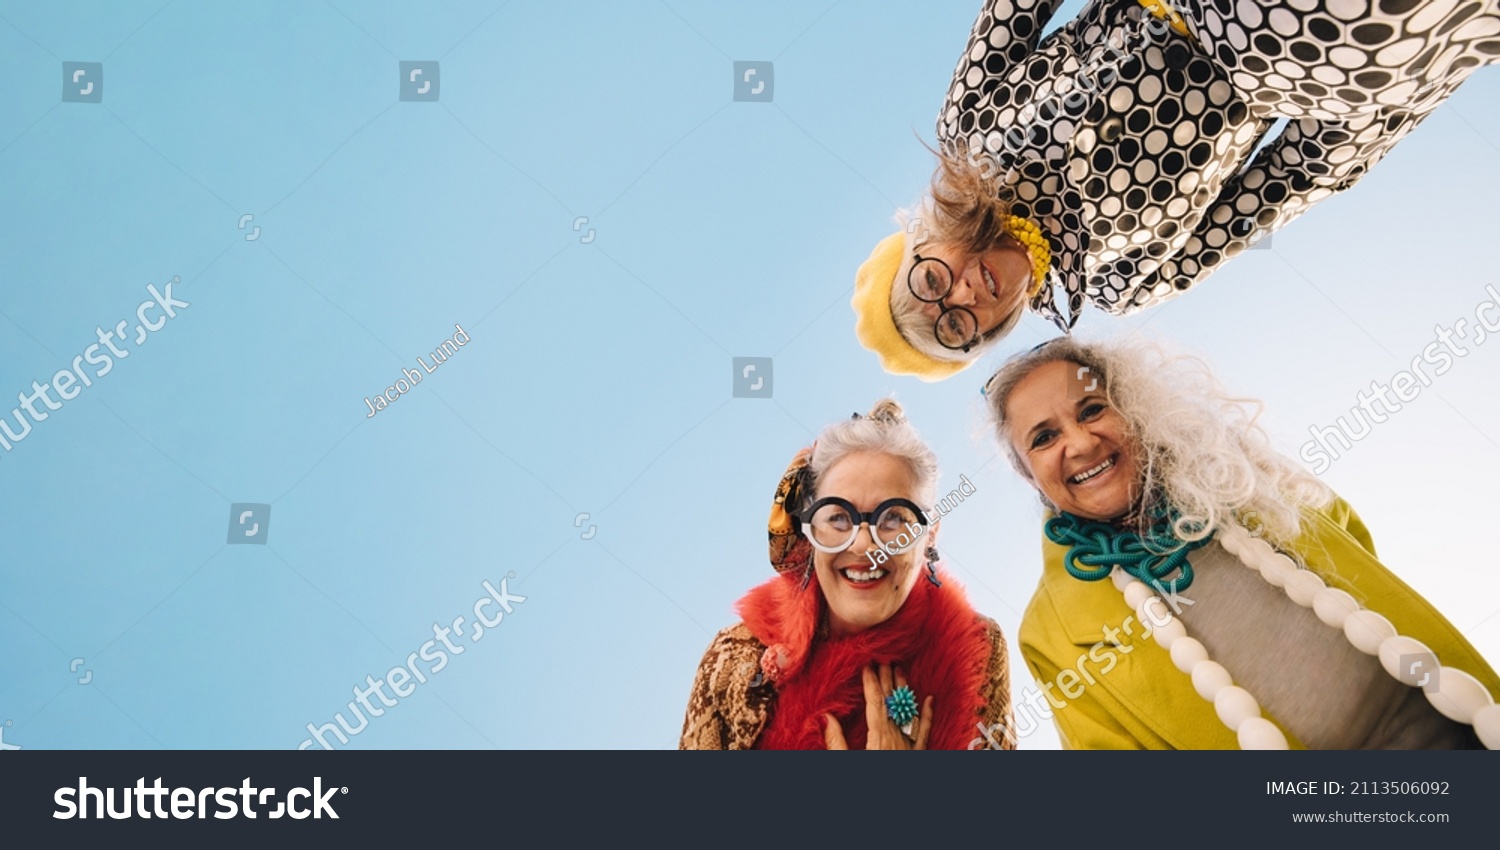 Low angle view of happy senior women smiling at the camera outdoors. Group of cheerful elderly women wearing colourful casual clothing. Three stylish senior women enjoying their golden years. #2113506092